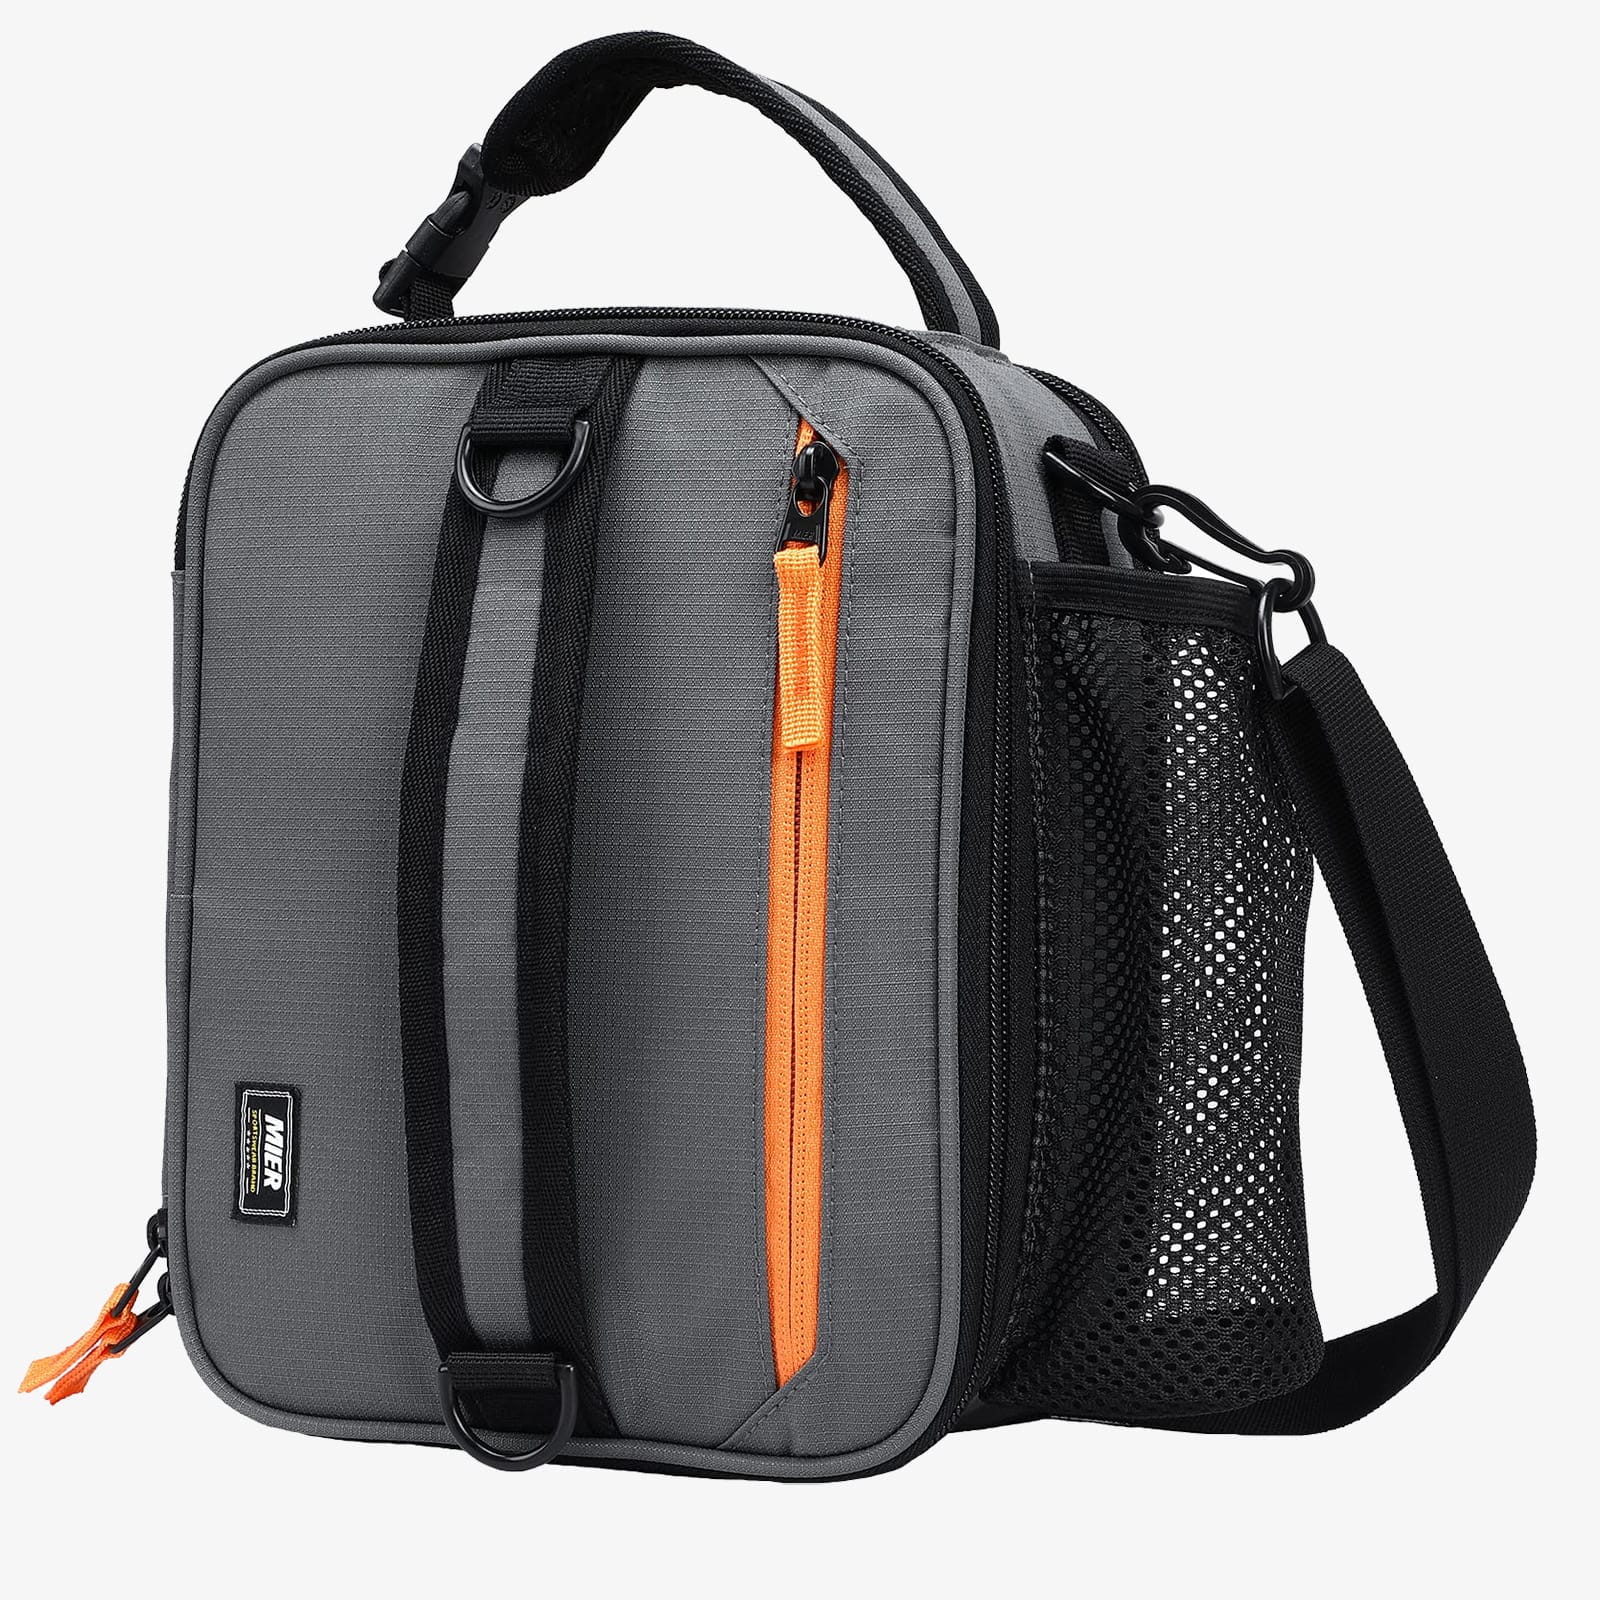 MIER Expandable Lunch Bag Insulated Lunch Box for Men Boys, Grey Orange